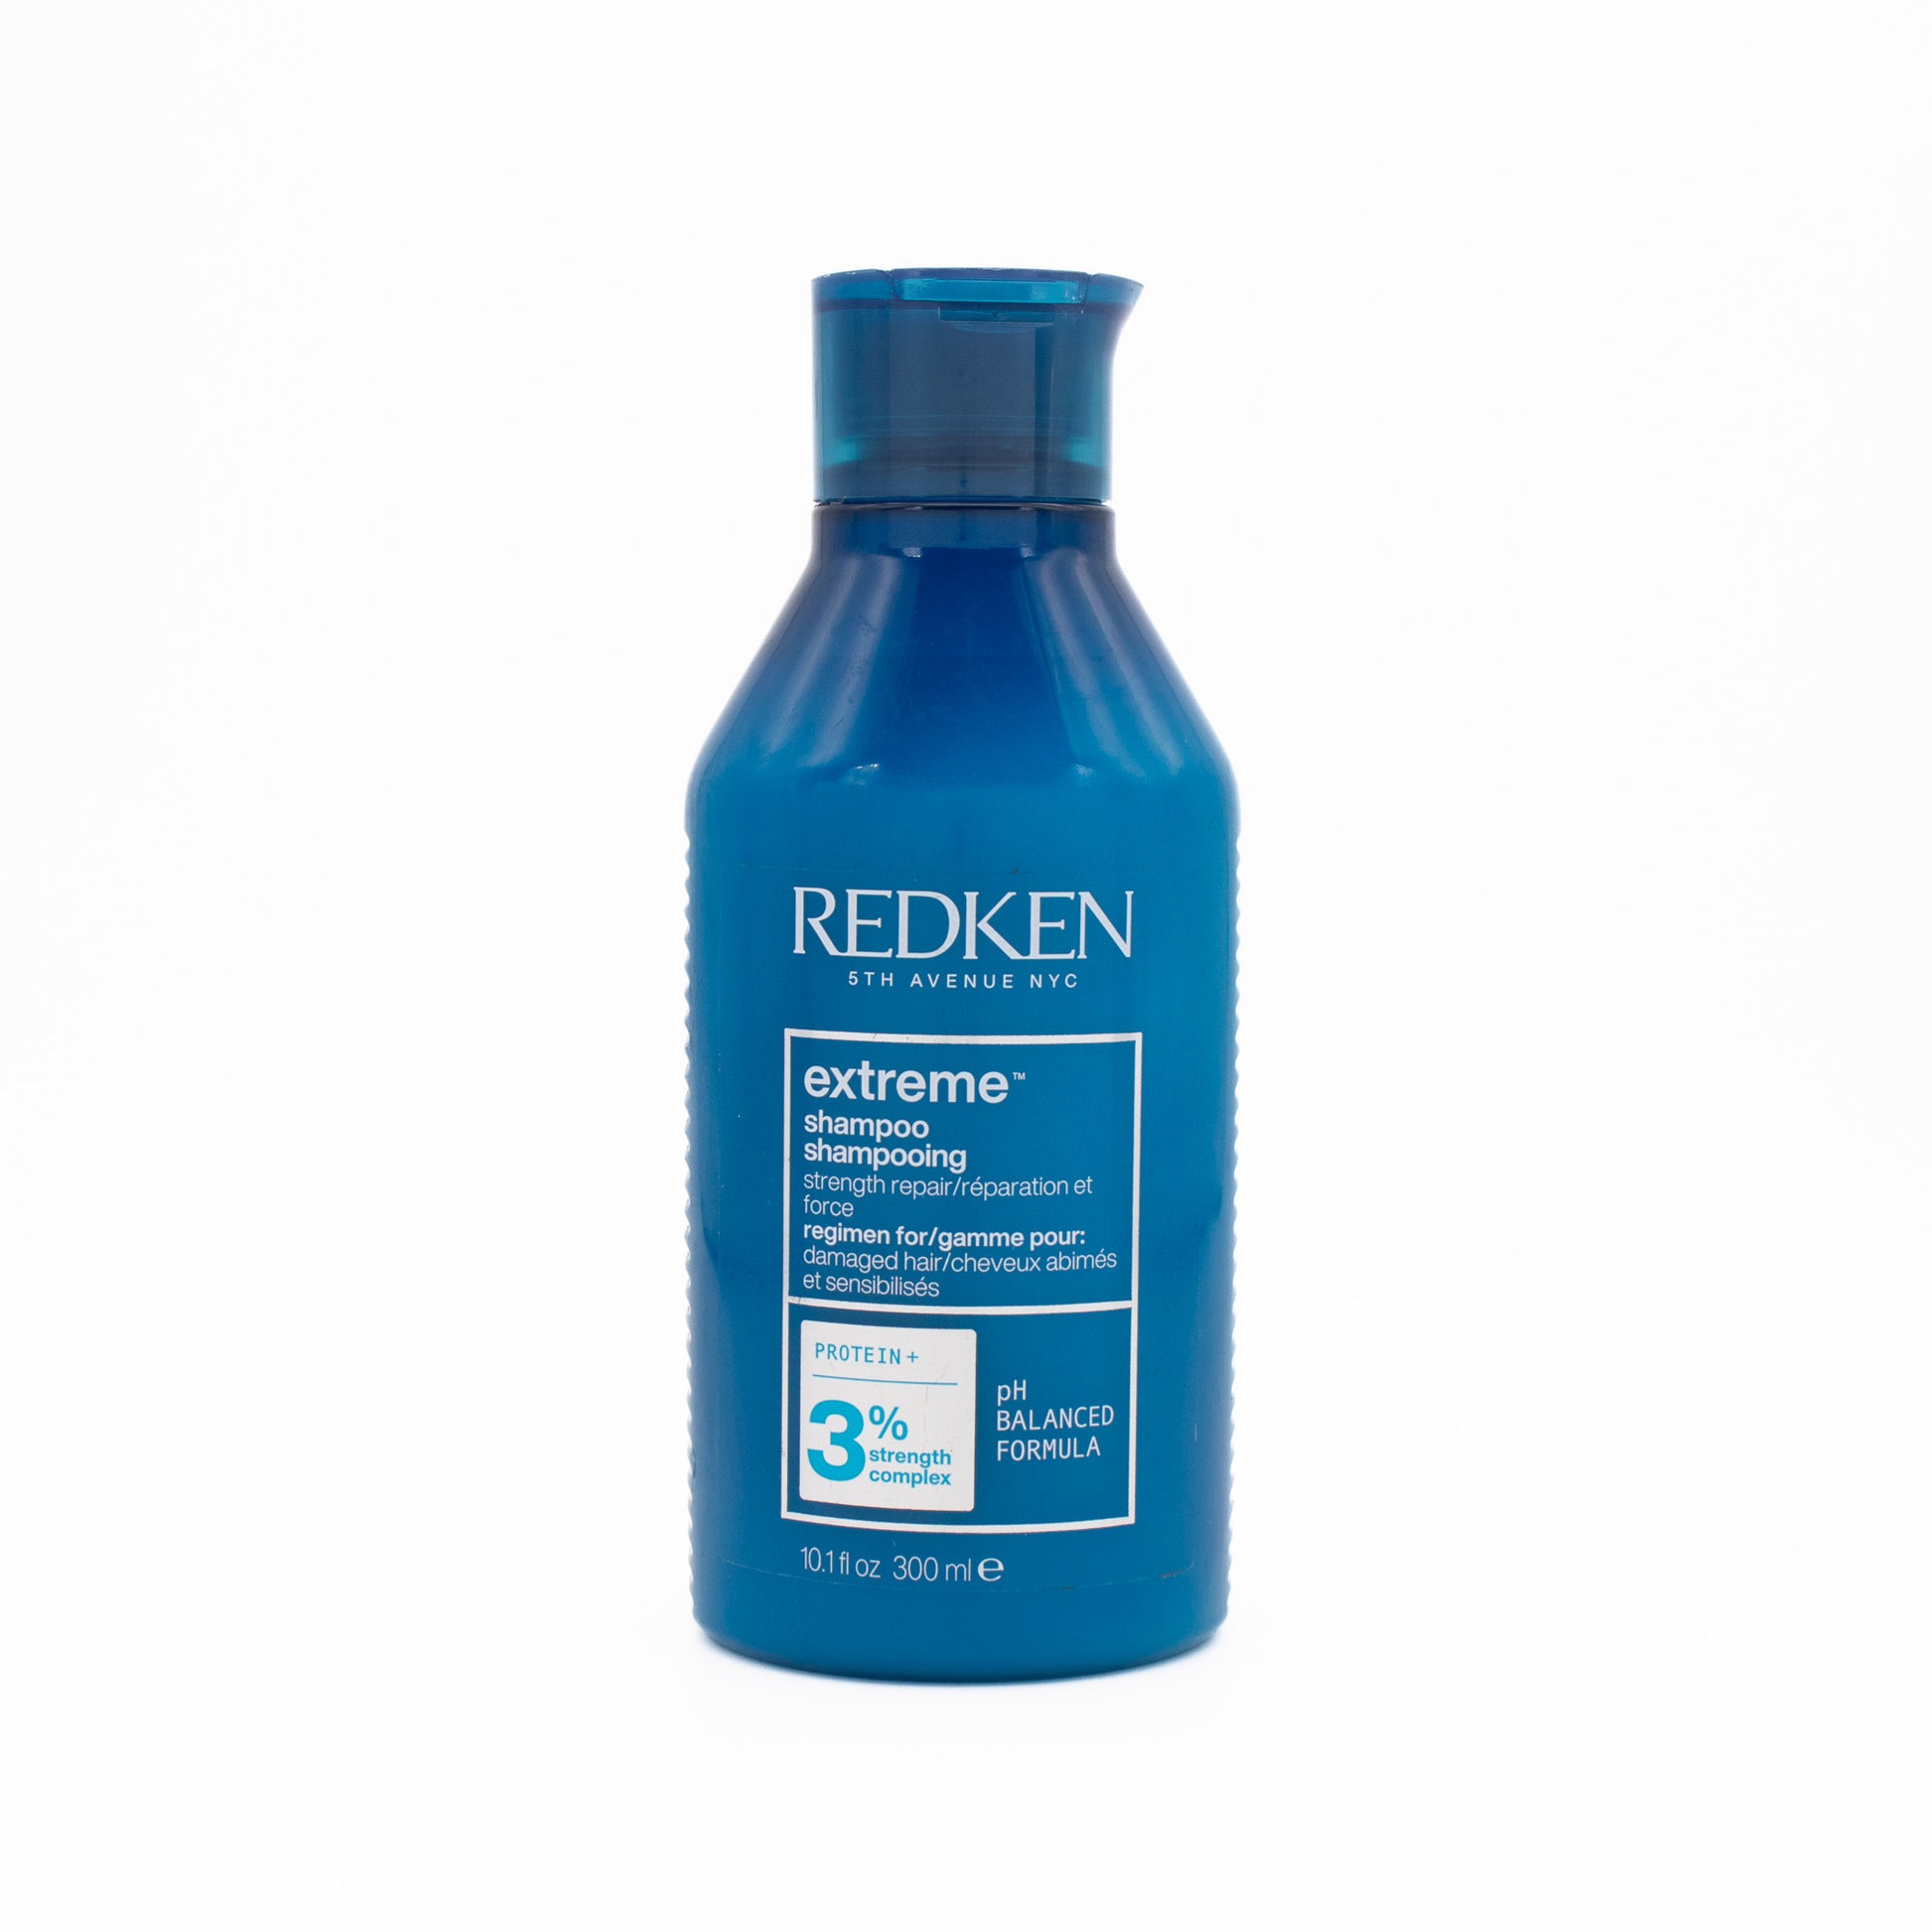 Redken Extreme Shampoo 300ml - Imperfect Container - This is Beauty UK